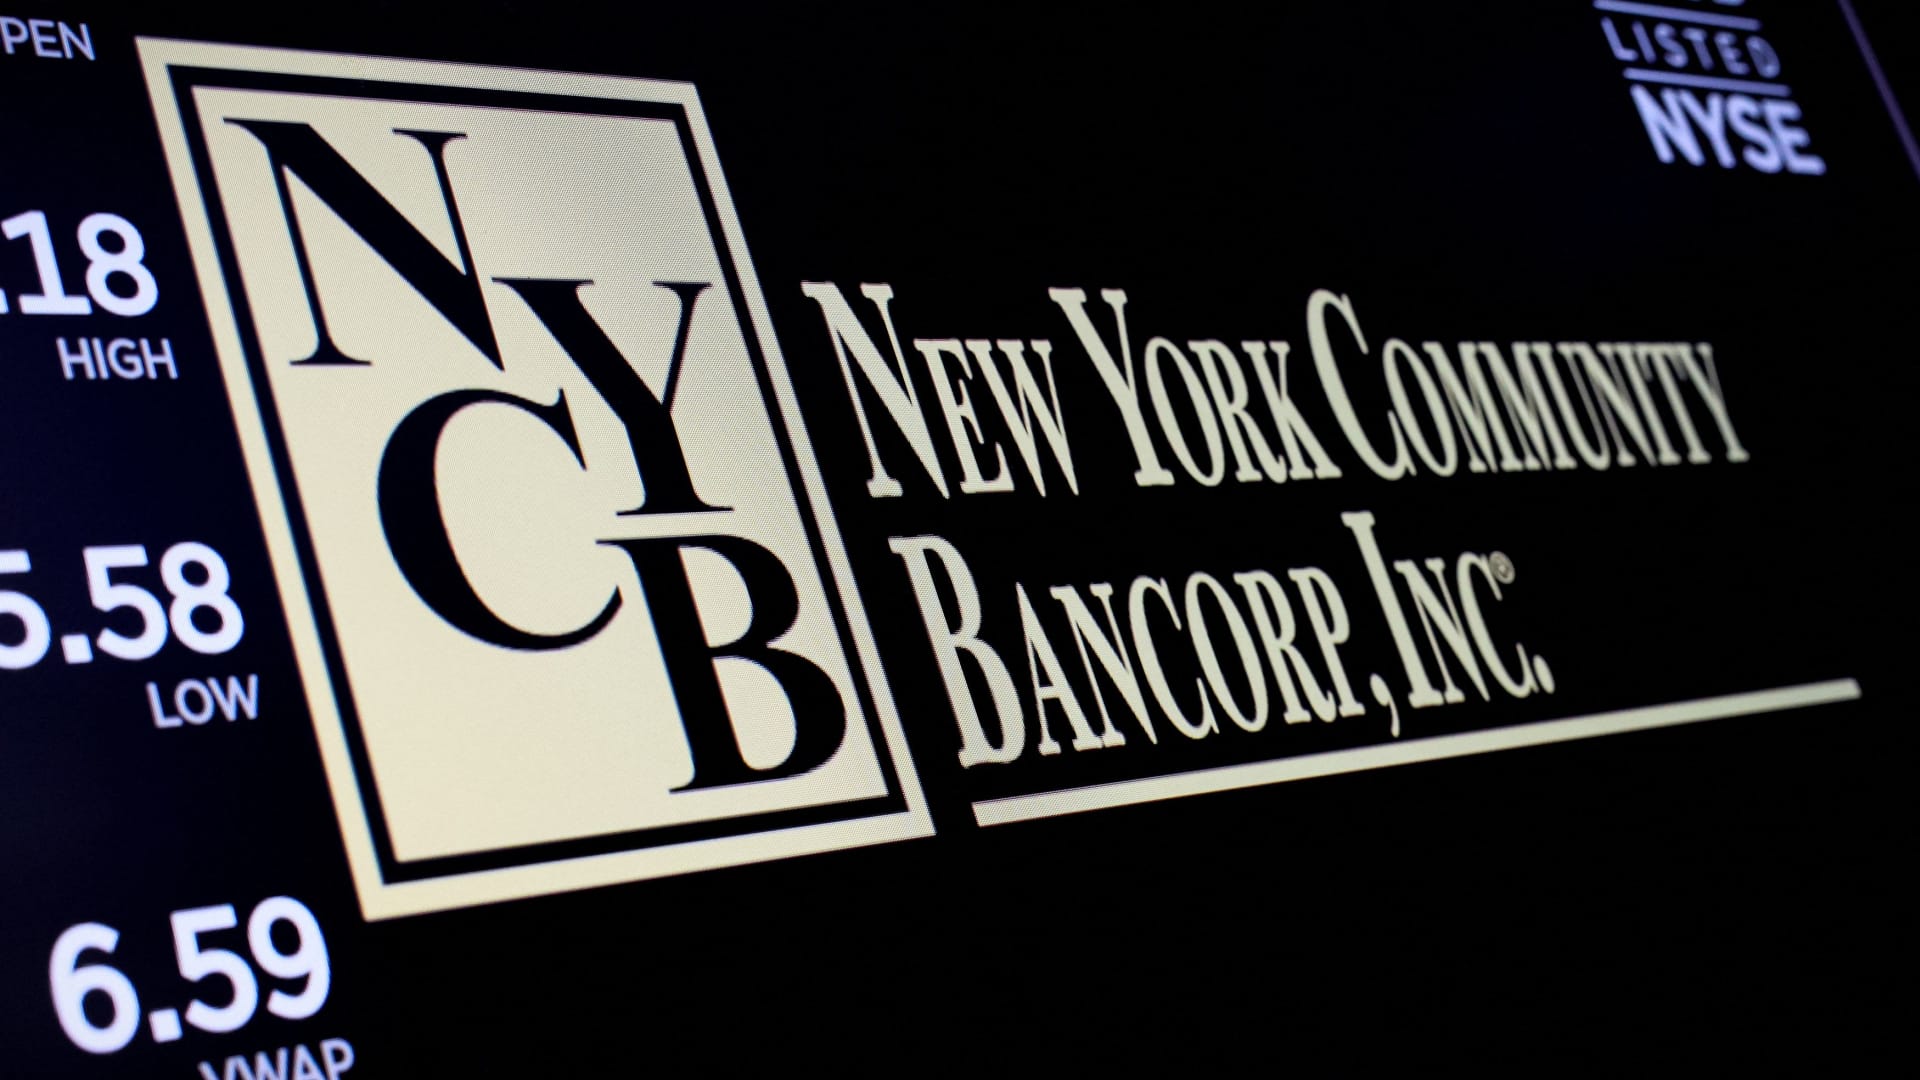 New York Community Bancorp stock falls more than 20% as slump extends